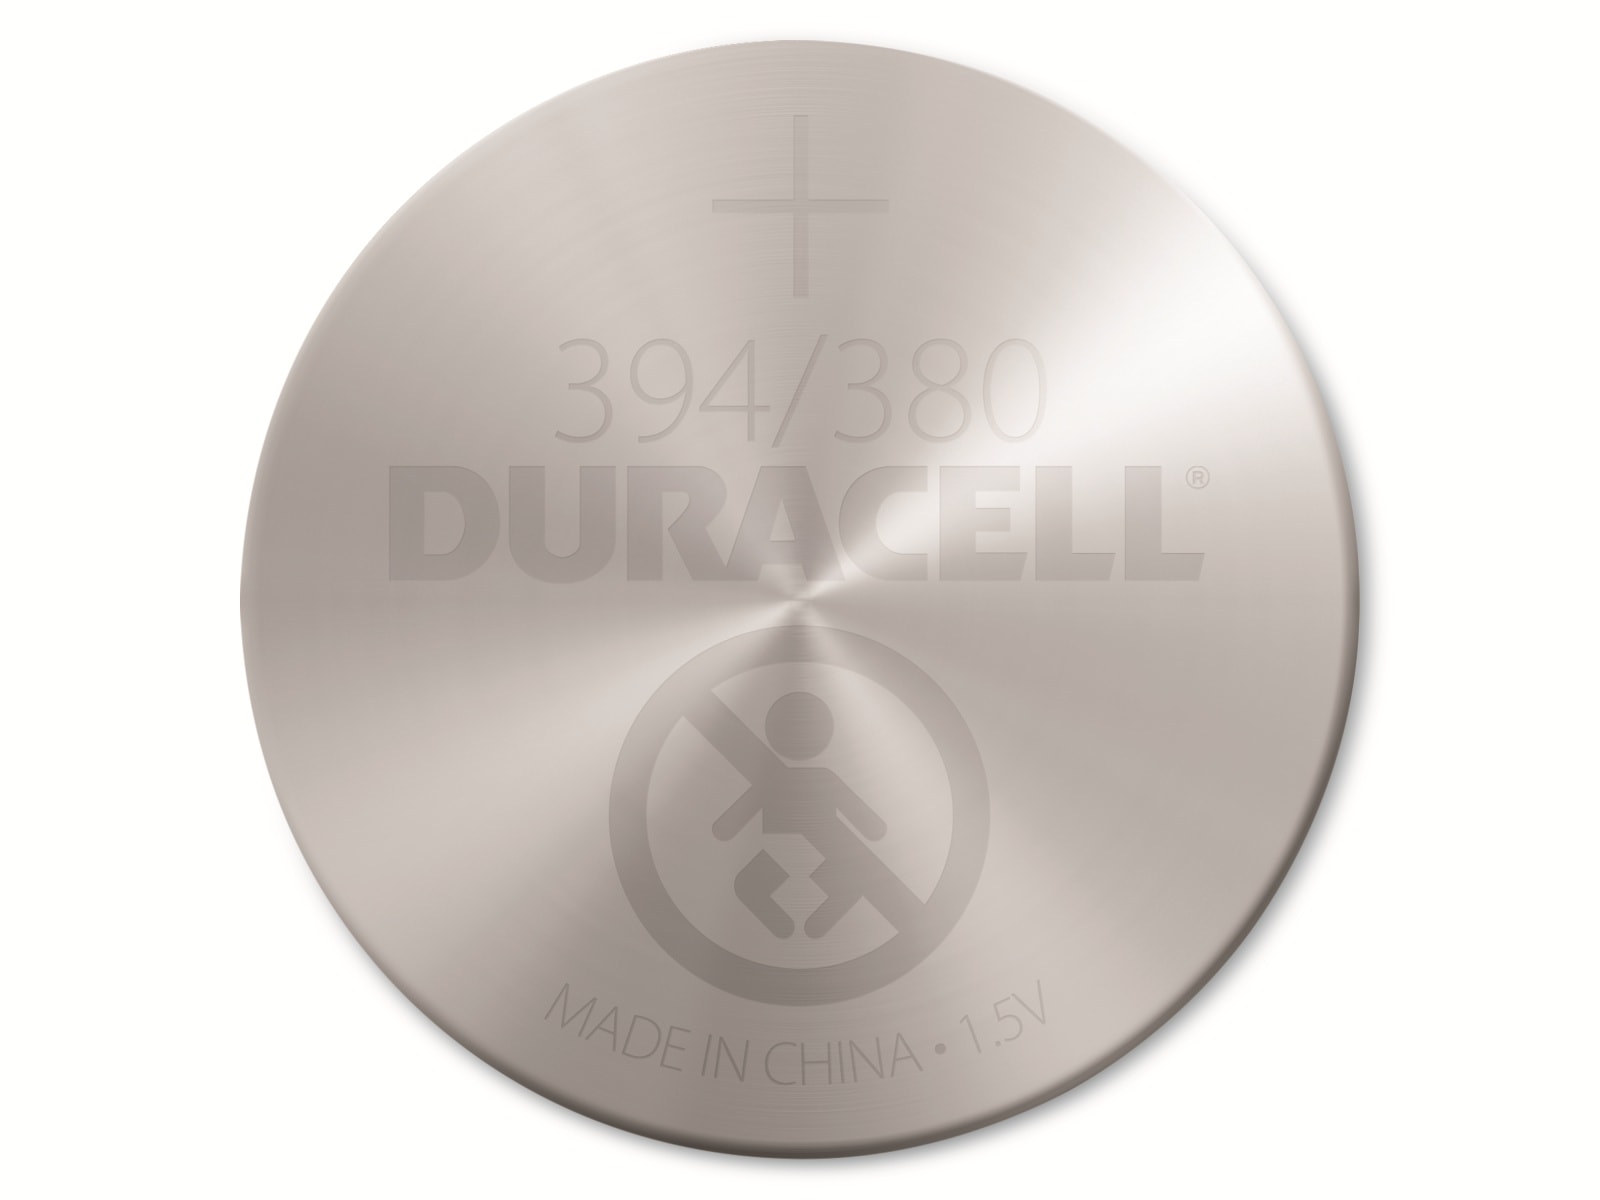 DURACELL Silver Oxide-Knopfzelle SR45, 1.5V, Watch